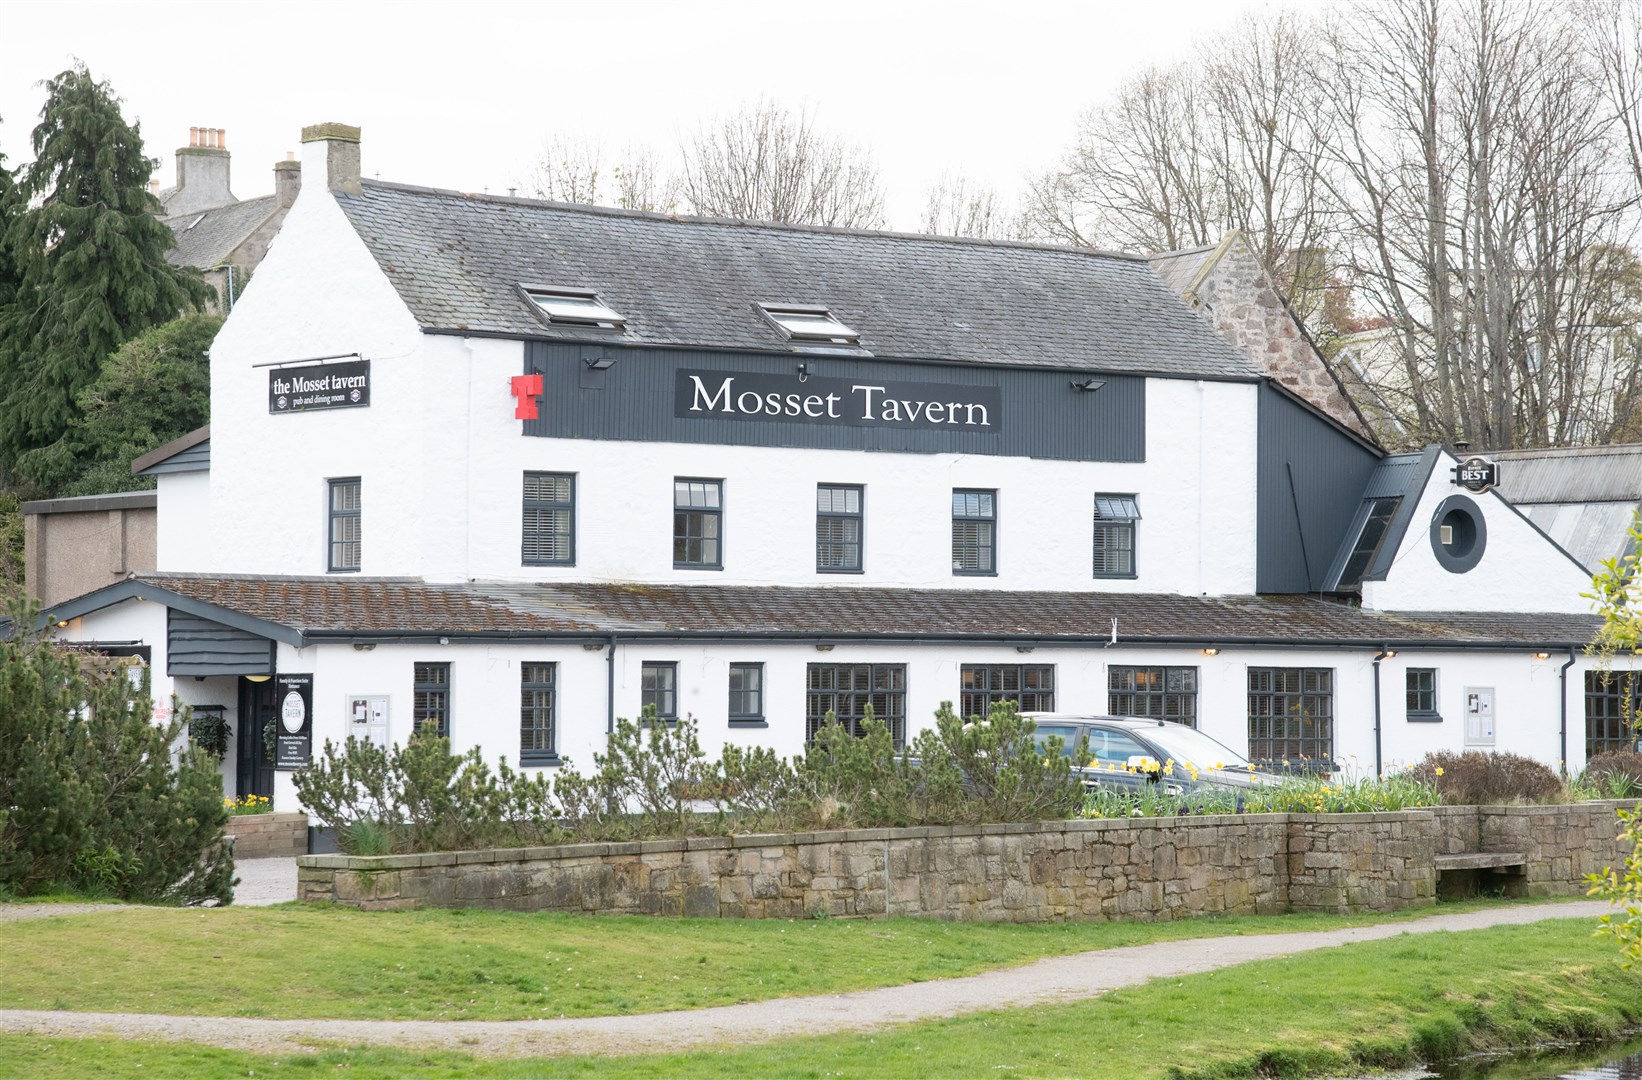 The Mosset Tavern - a pub and restaurant in the centre of Forres.Picture: Daniel Forsyth.